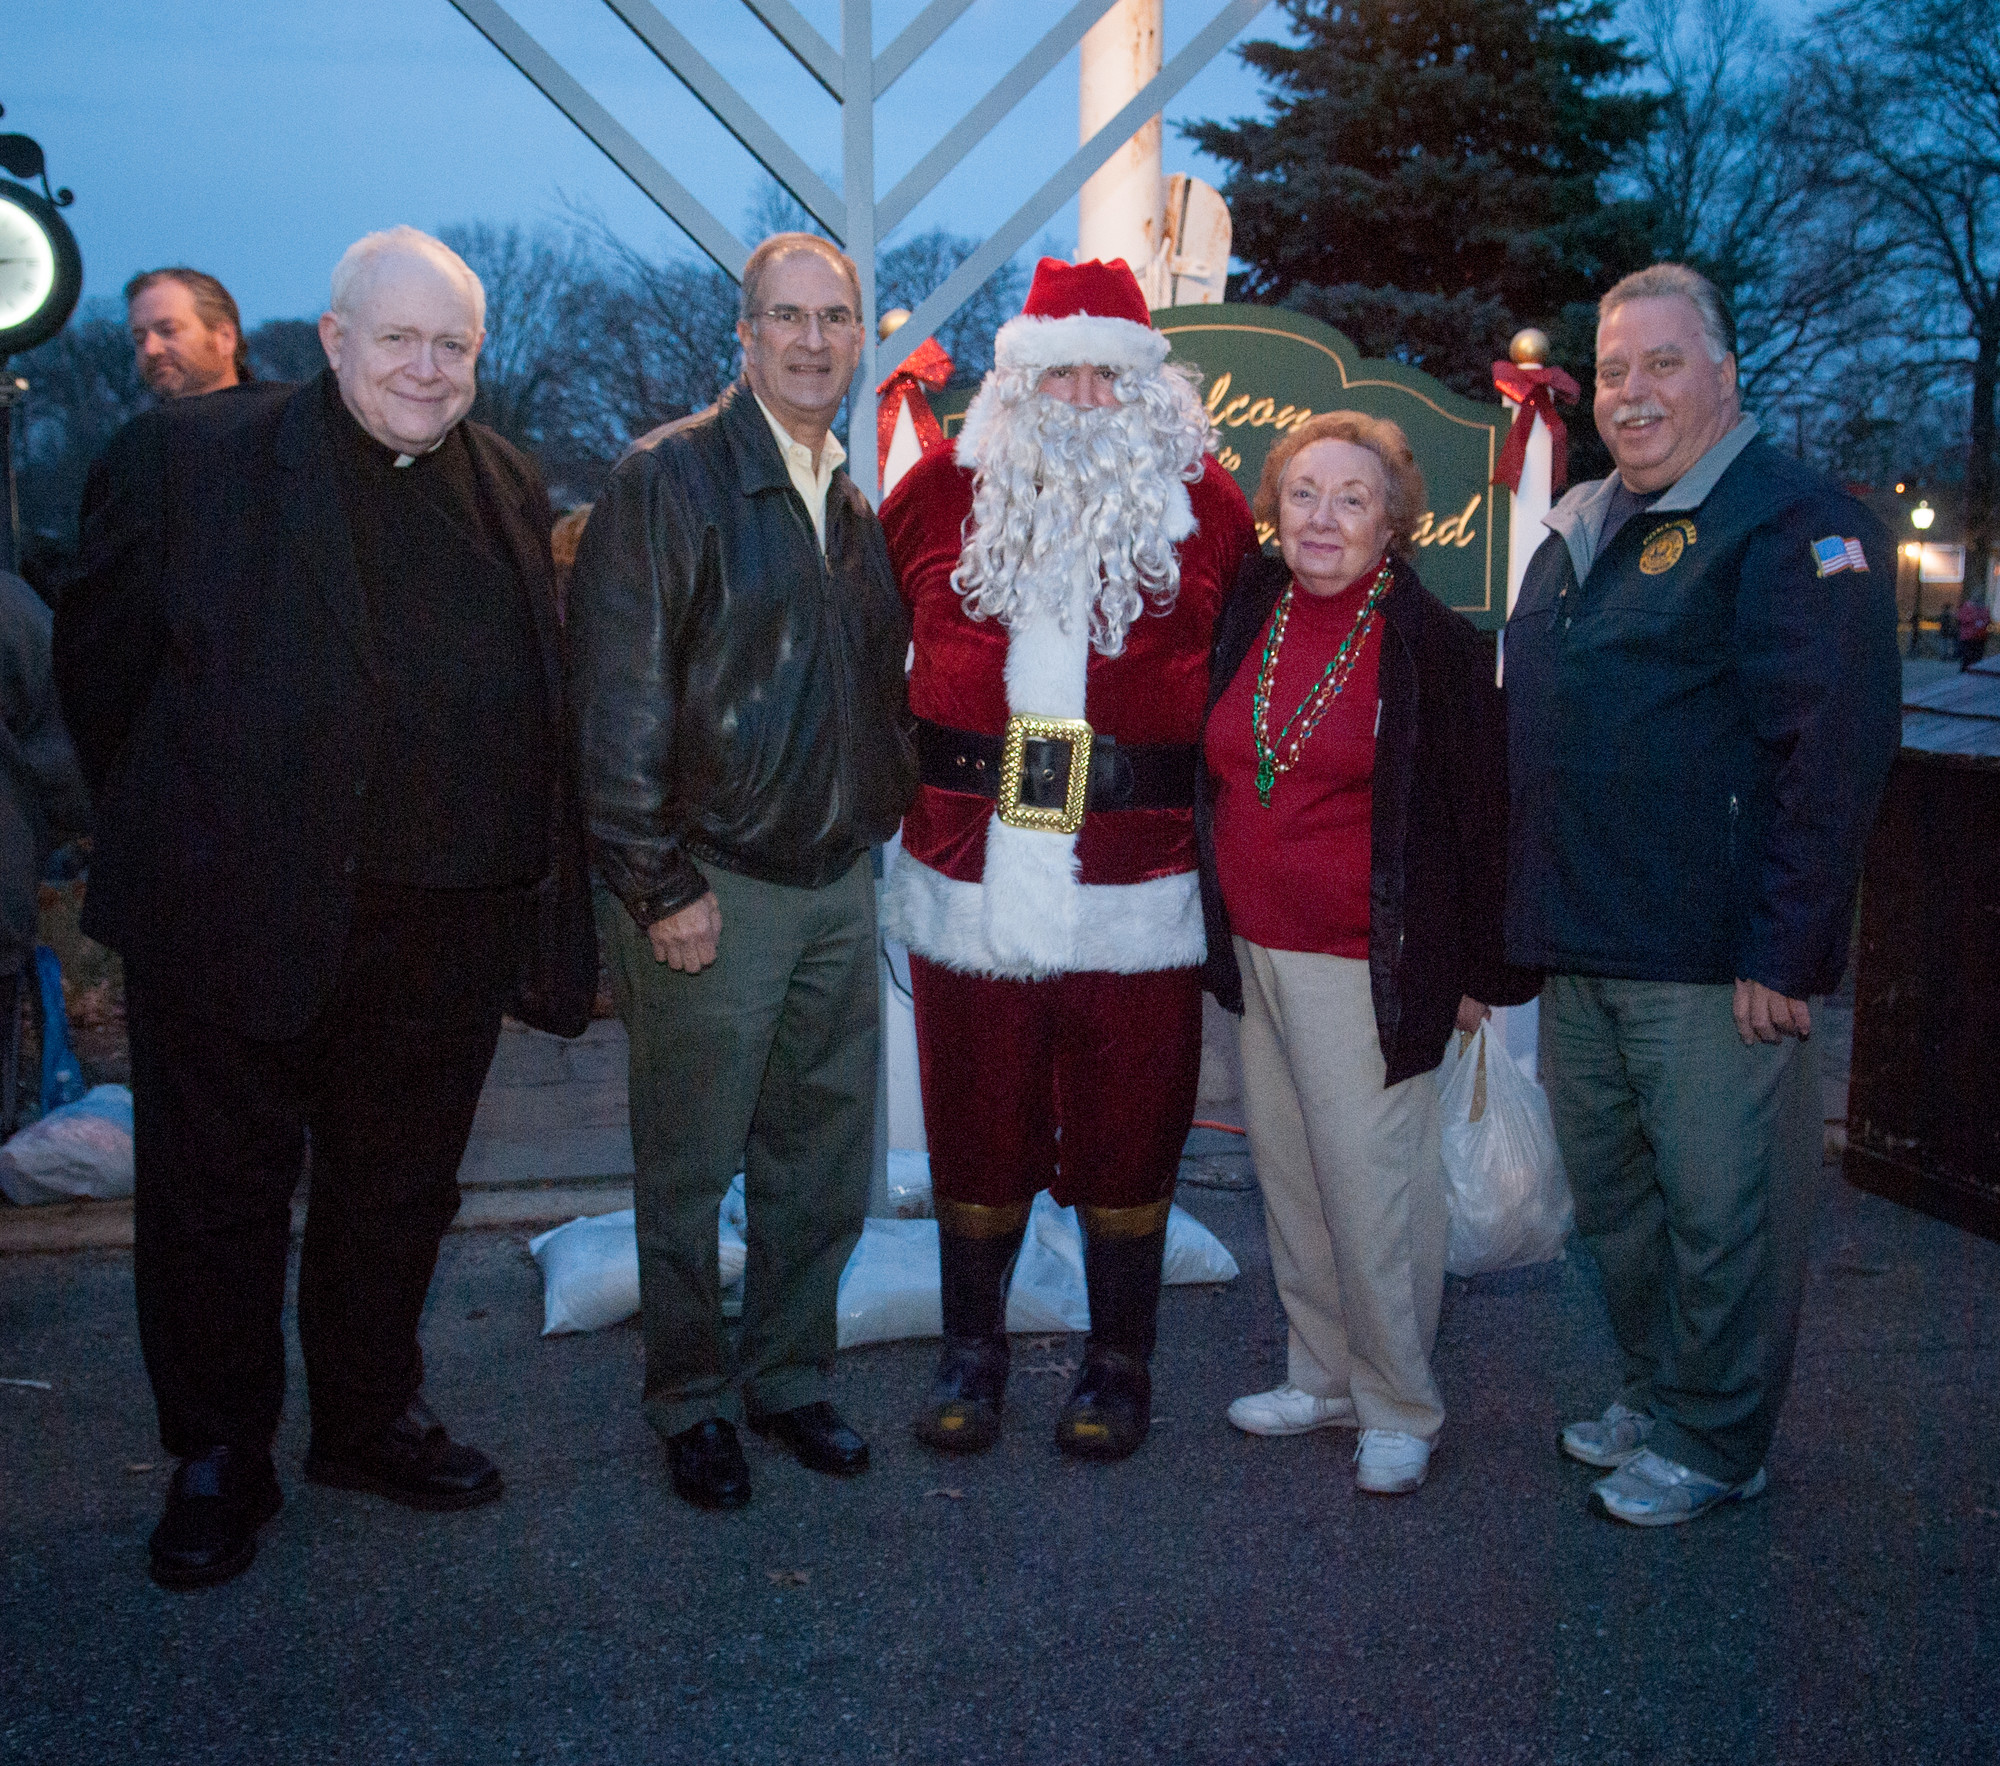 Monsignor Maniscalco of St. Thomas, Legislator Vincent T. Muscarella, W. Hempstead Civic Assoc. Chairperson Rosalie Norton and Frederick Senti, Former Chief of Lakeview Fire Department pose with Santa.